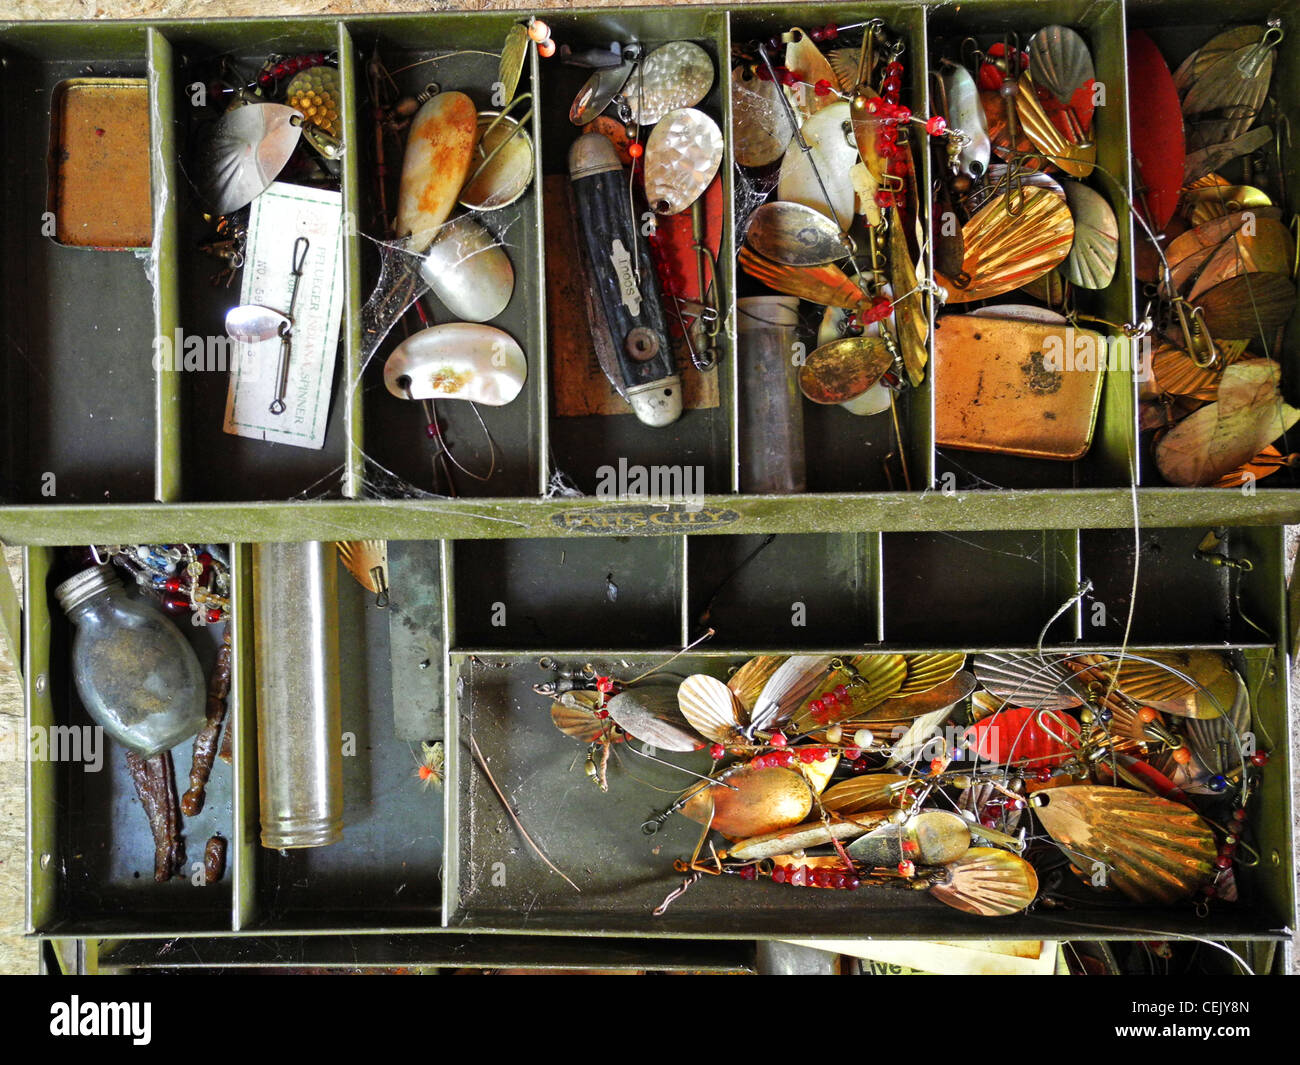 https://c8.alamy.com/comp/CEJY8N/old-fishing-tackle-box-is-filled-with-lures-from-bygone-days-in-the-CEJY8N.jpg